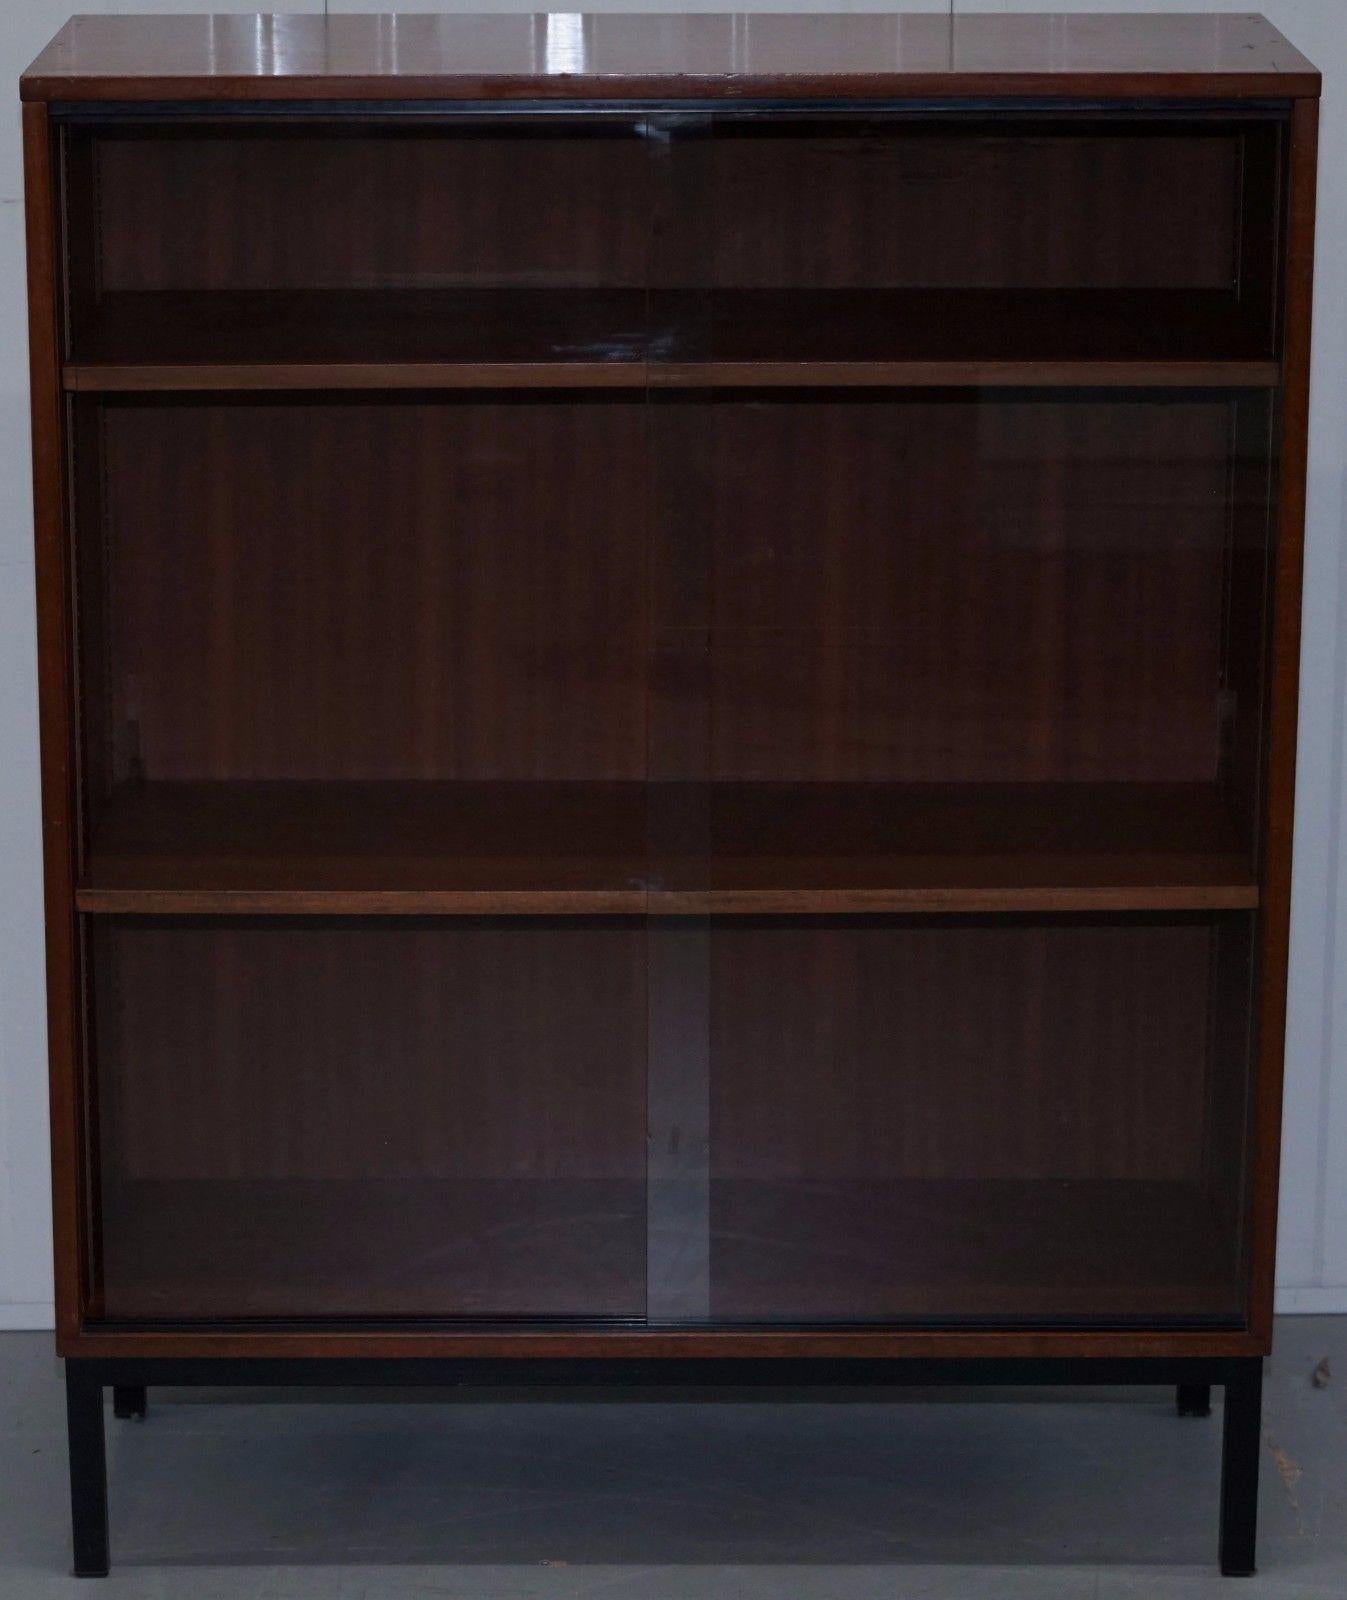 We are delighted to offer for sale this absolutely stunning Danish mid-century mahogany veneer glass doored display cabinet

A really on trend and stylish piece that’s extremely functional, the glass doors slide revealing height adjustable